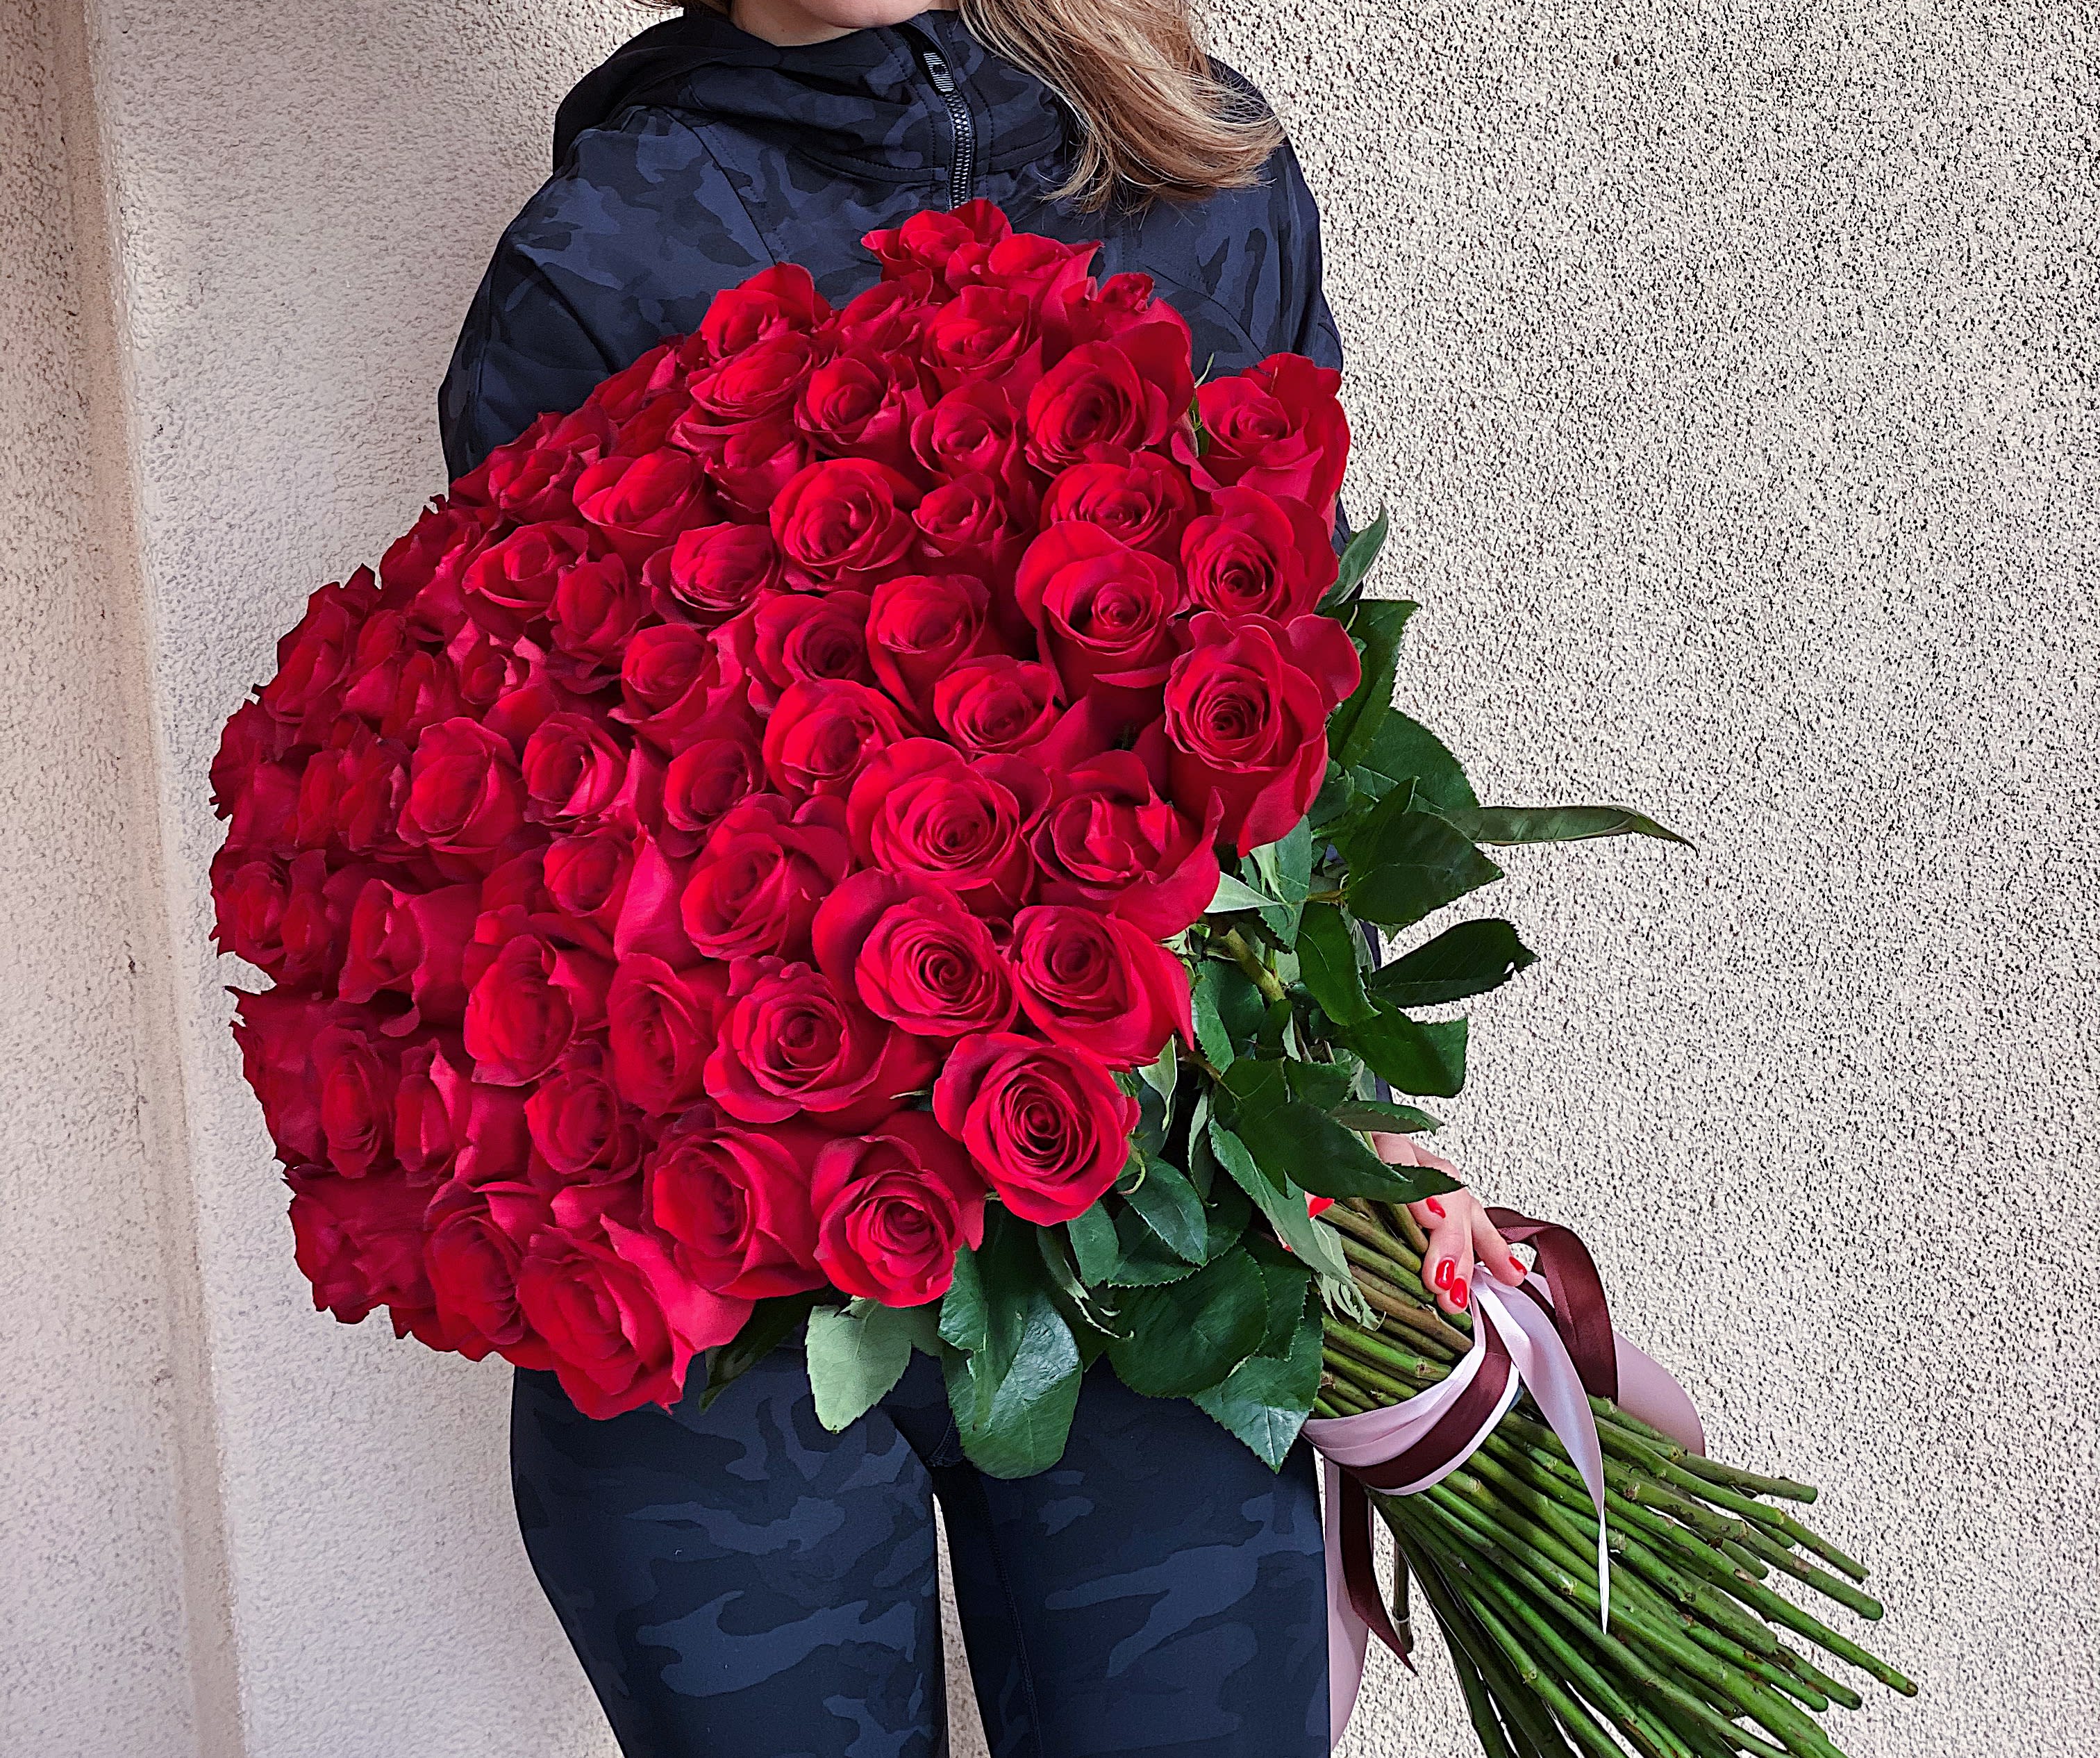 100 red roses bouquet in Irvine, CA | Flowers Delivery Irvine